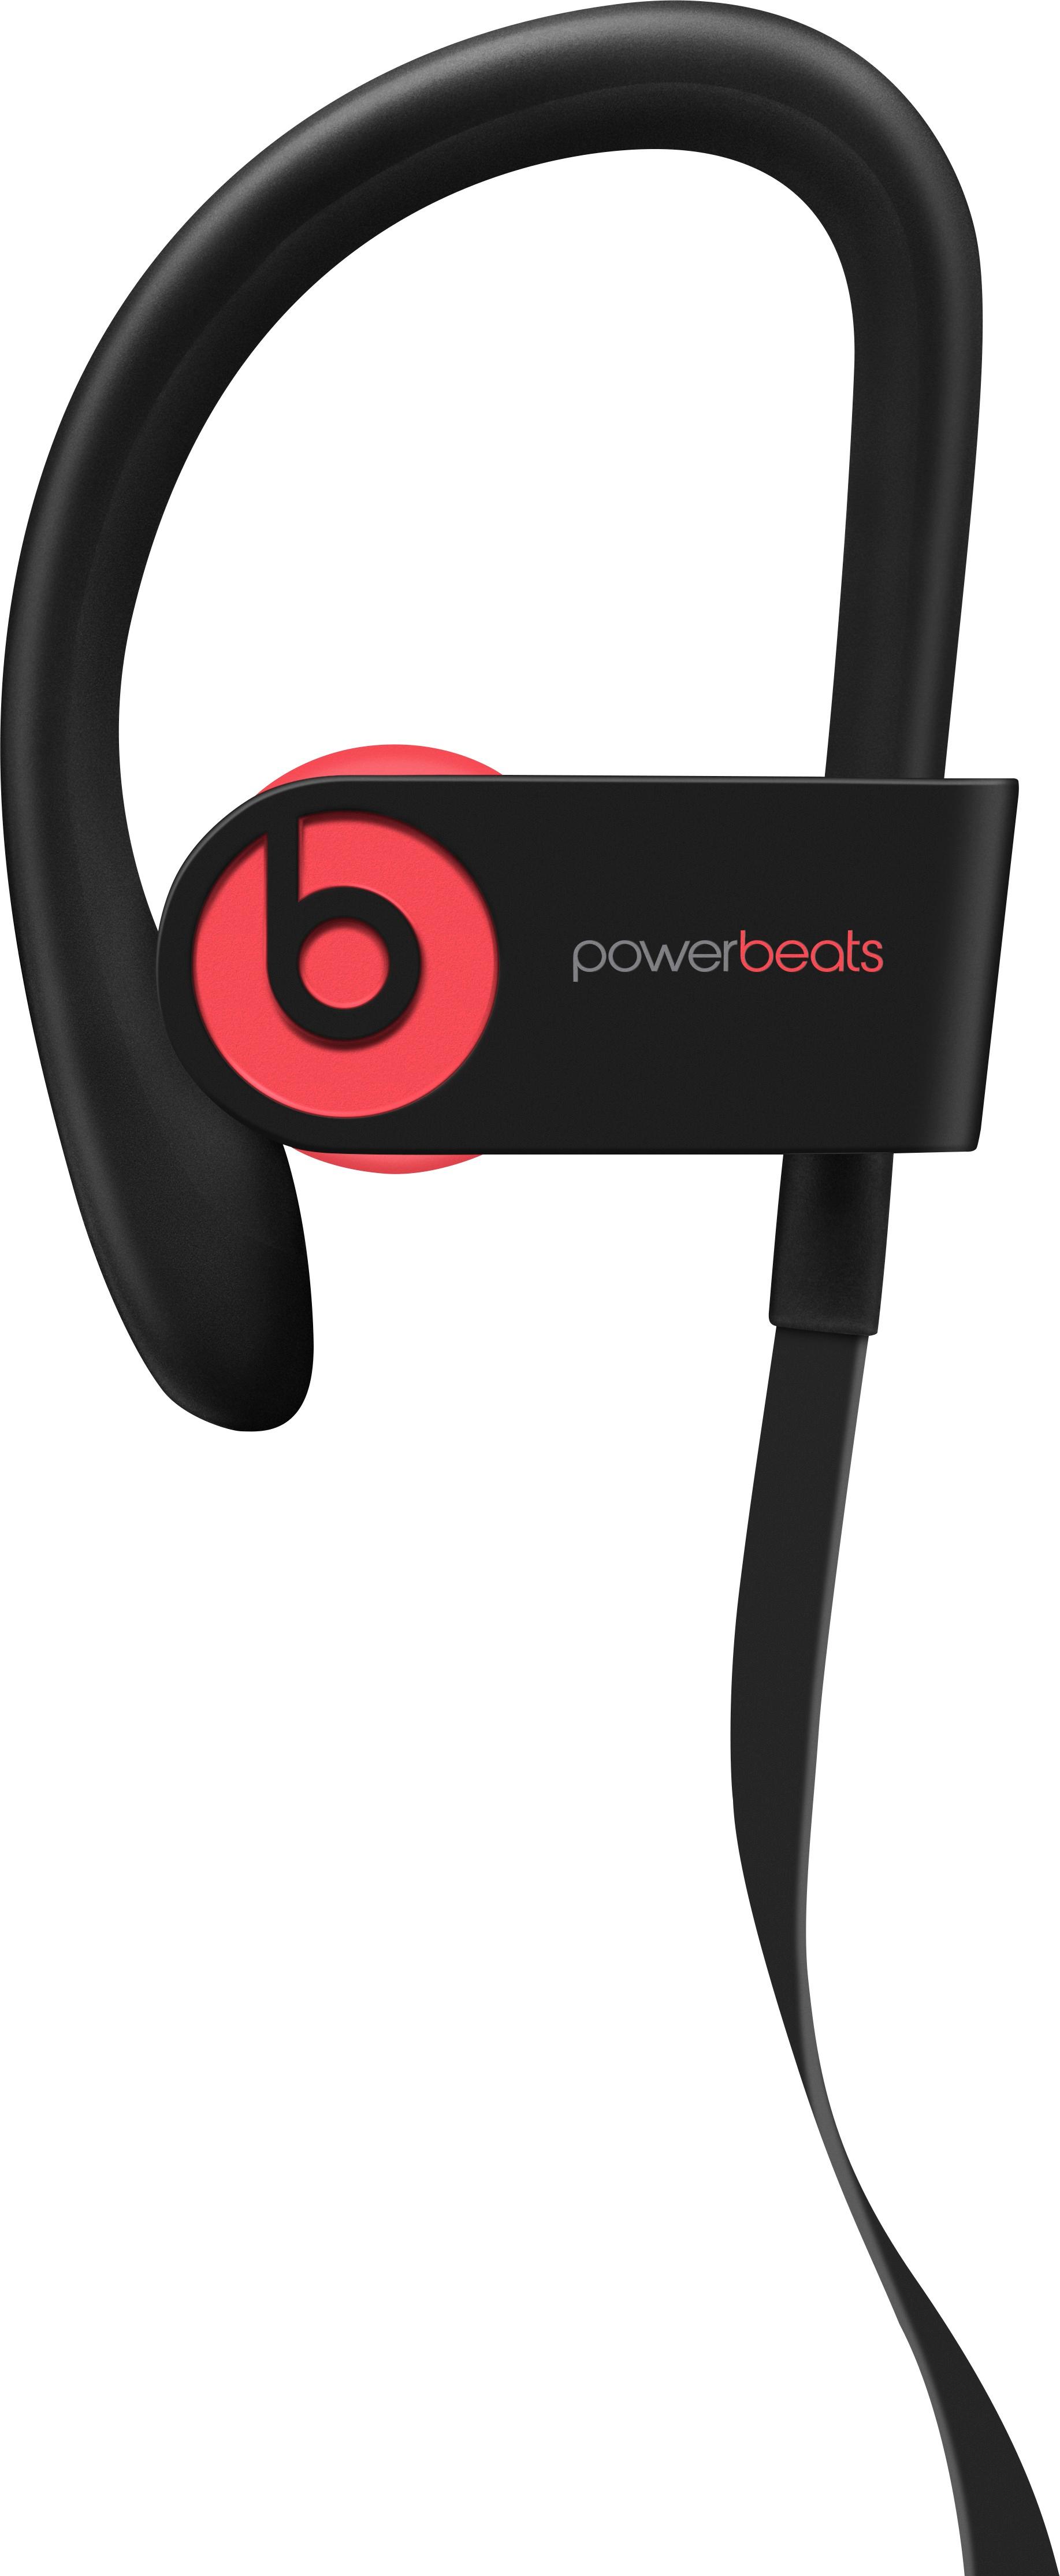 Beats by Dr. Dre Geek Squad Certified 